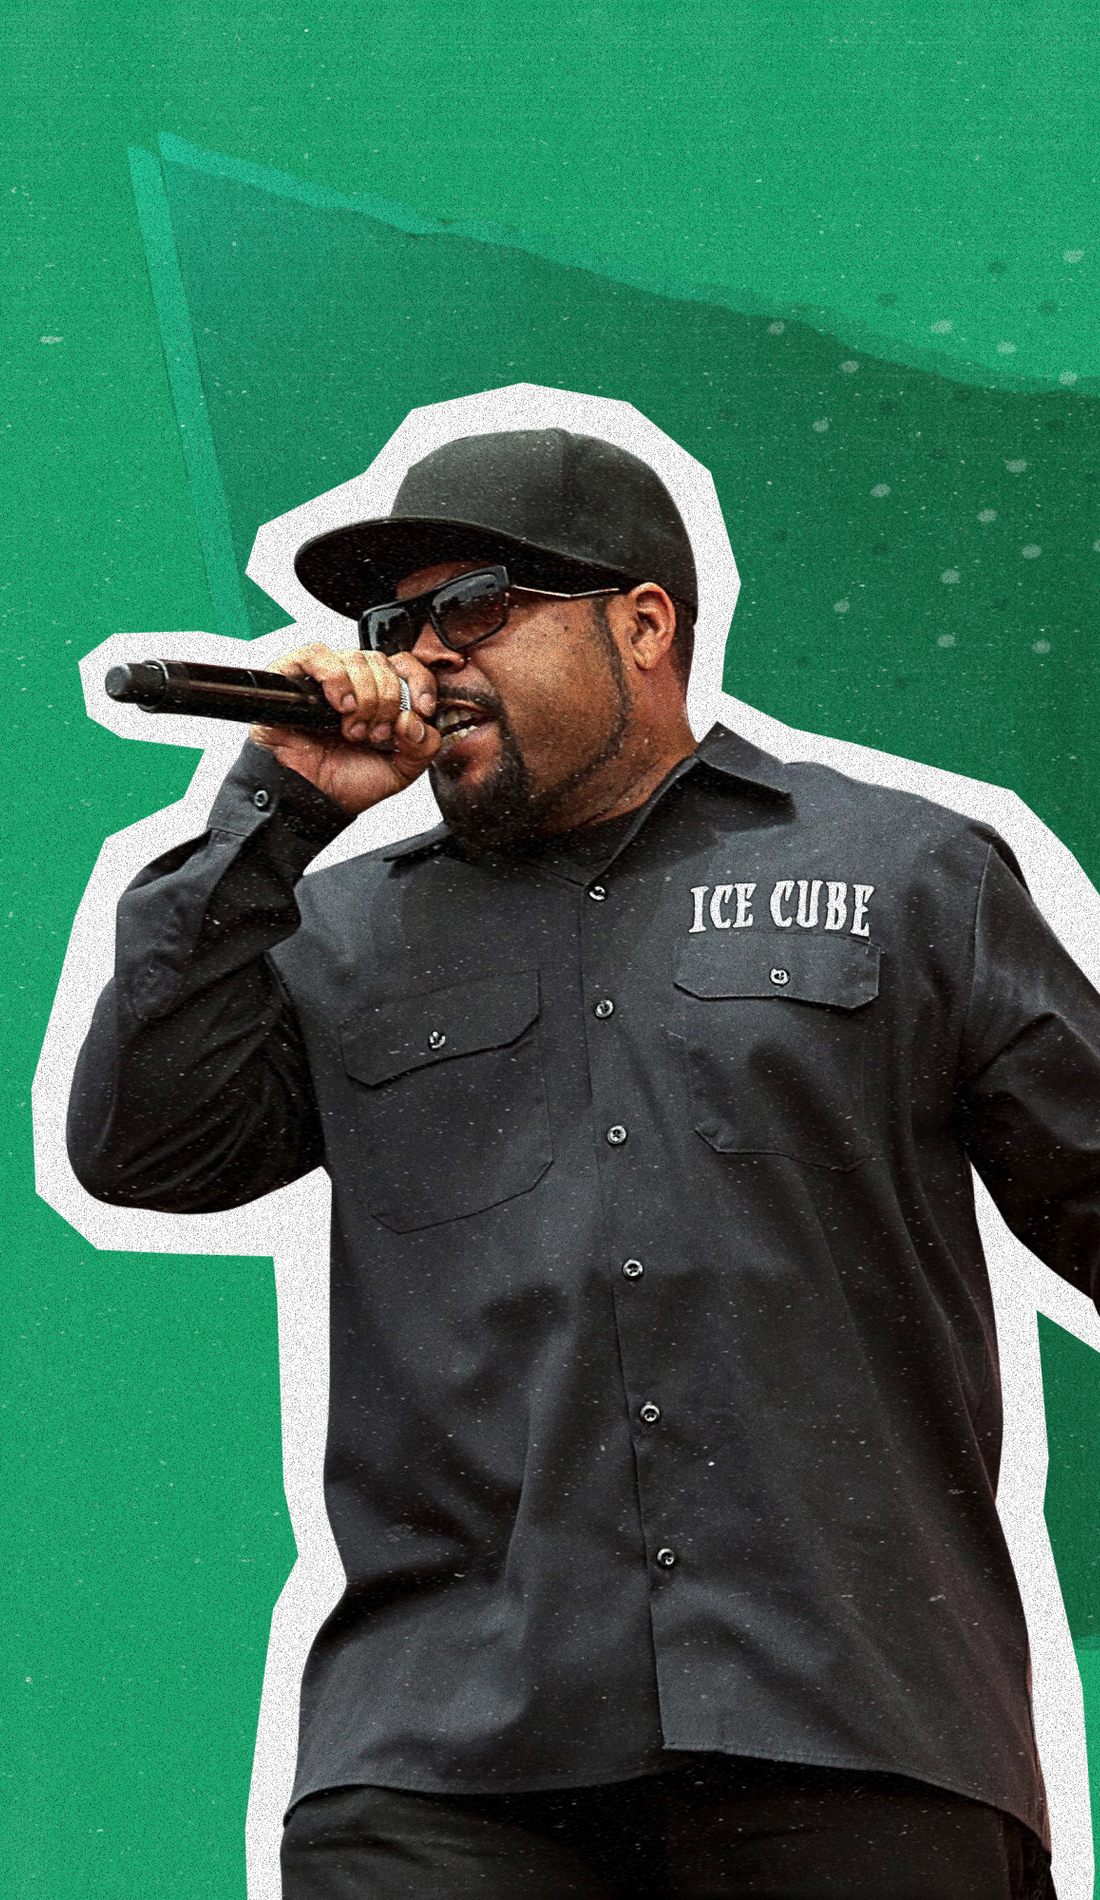 A Ice Cube live event